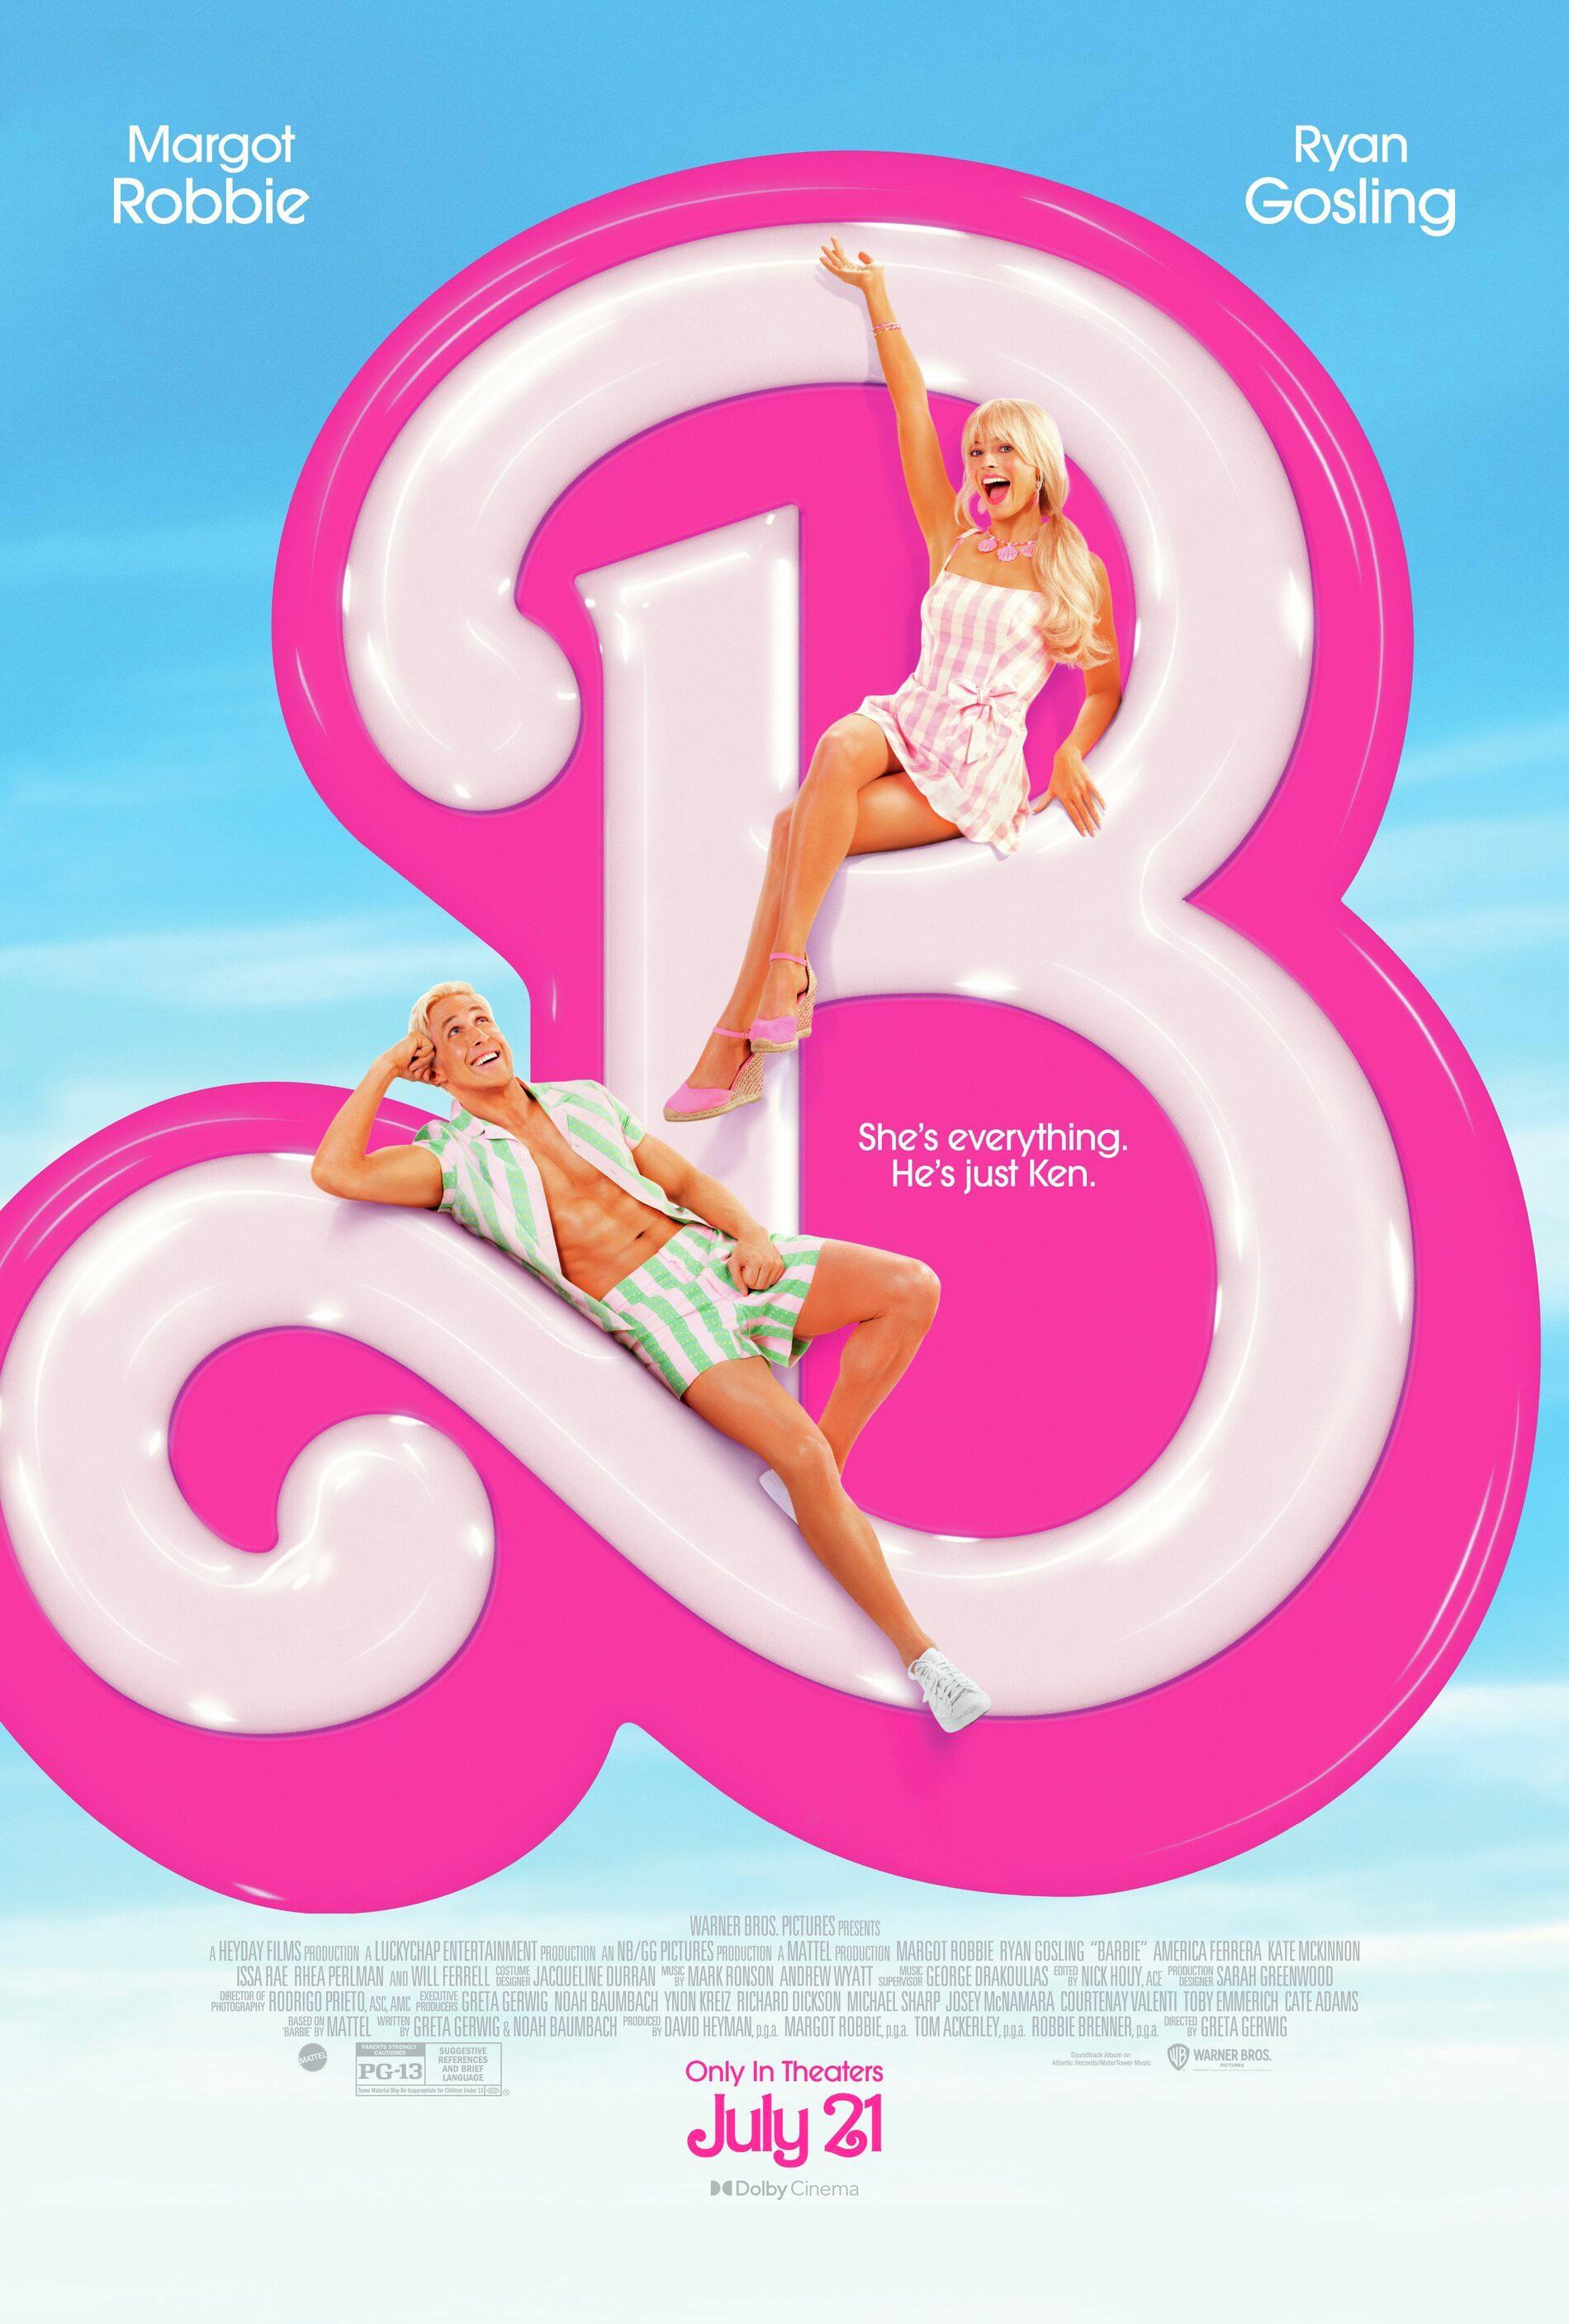 Barbie DVD cover with Ryan Gosling and Margot Robbie